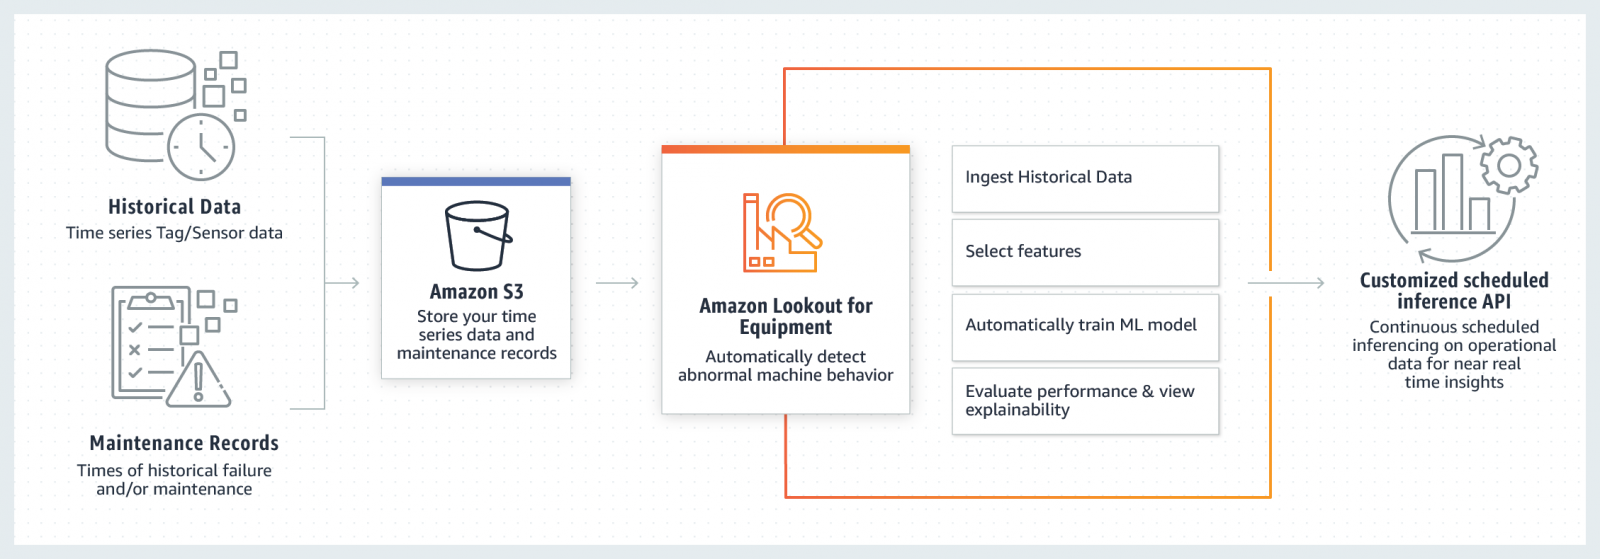 Amazon Lookout for Equipment Features - Amazon Web Services